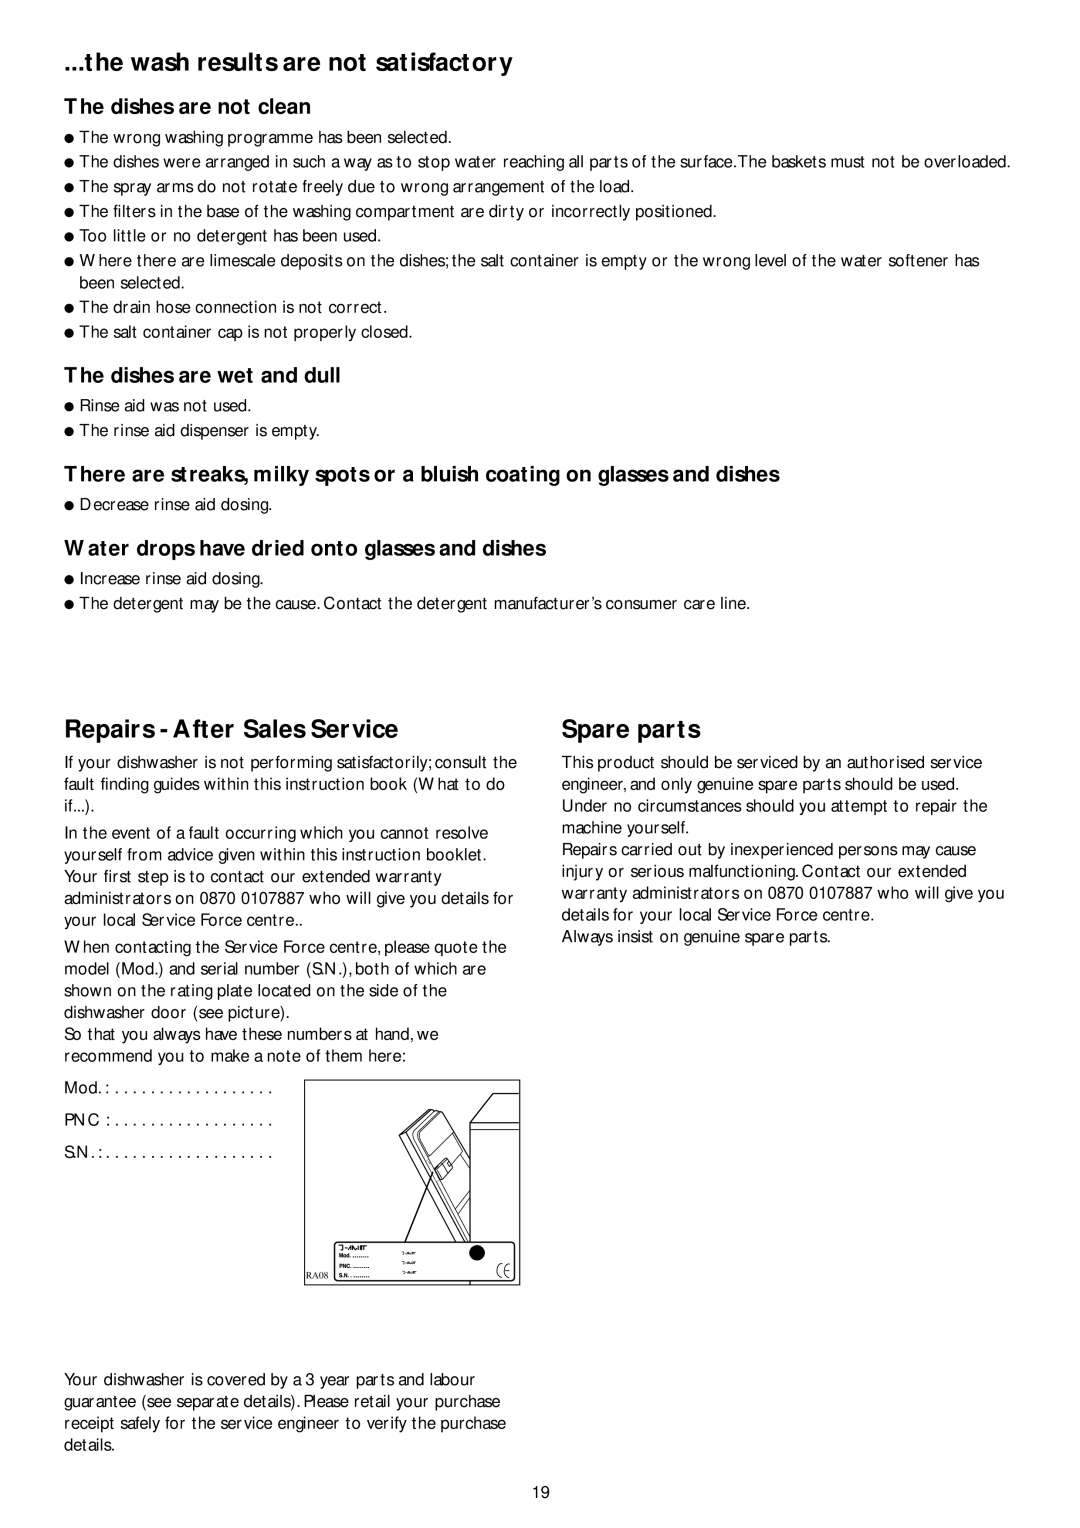 John Lewis JLDWW 1201 instruction manual the wash results are not satisfactory, Repairs - After Sales Service, Spare parts 